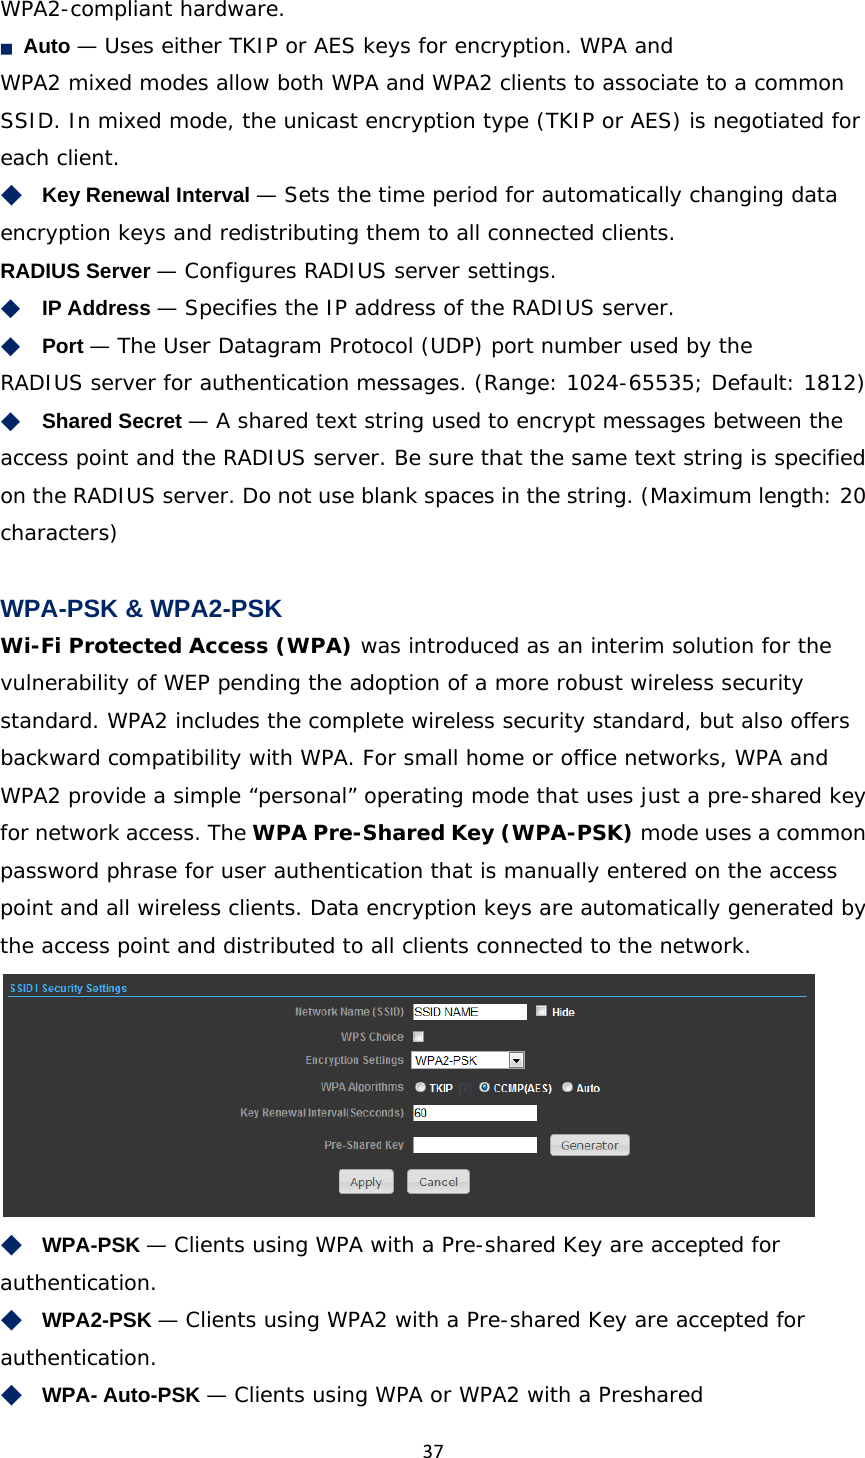 37WPA2-compliant hardware. ■　Auto — Uses either TKIP or AES keys for encryption. WPA and WPA2 mixed modes allow both WPA and WPA2 clients to associate to a common SSID. In mixed mode, the unicast encryption type (TKIP or AES) is negotiated for each client. ◆　Key Renewal Interval — Sets the time period for automatically changing data encryption keys and redistributing them to all connected clients.  RADIUS Server — Configures RADIUS server settings. ◆　IP Address — Specifies the IP address of the RADIUS server. ◆　Port — The User Datagram Protocol (UDP) port number used by the RADIUS server for authentication messages. (Range: 1024-65535; Default: 1812) ◆　Shared Secret — A shared text string used to encrypt messages between the access point and the RADIUS server. Be sure that the same text string is specified on the RADIUS server. Do not use blank spaces in the string. (Maximum length: 20 characters)  WPA-PSK &amp; WPA2-PSK Wi-Fi Protected Access (WPA) was introduced as an interim solution for the vulnerability of WEP pending the adoption of a more robust wireless security standard. WPA2 includes the complete wireless security standard, but also offers backward compatibility with WPA. For small home or office networks, WPA and WPA2 provide a simple “personal” operating mode that uses just a pre-shared key for network access. The WPA Pre-Shared Key (WPA-PSK) mode uses a common password phrase for user authentication that is manually entered on the access point and all wireless clients. Data encryption keys are automatically generated by the access point and distributed to all clients connected to the network.  ◆　WPA-PSK — Clients using WPA with a Pre-shared Key are accepted for authentication.  ◆　WPA2-PSK — Clients using WPA2 with a Pre-shared Key are accepted for authentication.  ◆　WPA- Auto-PSK — Clients using WPA or WPA2 with a Preshared 